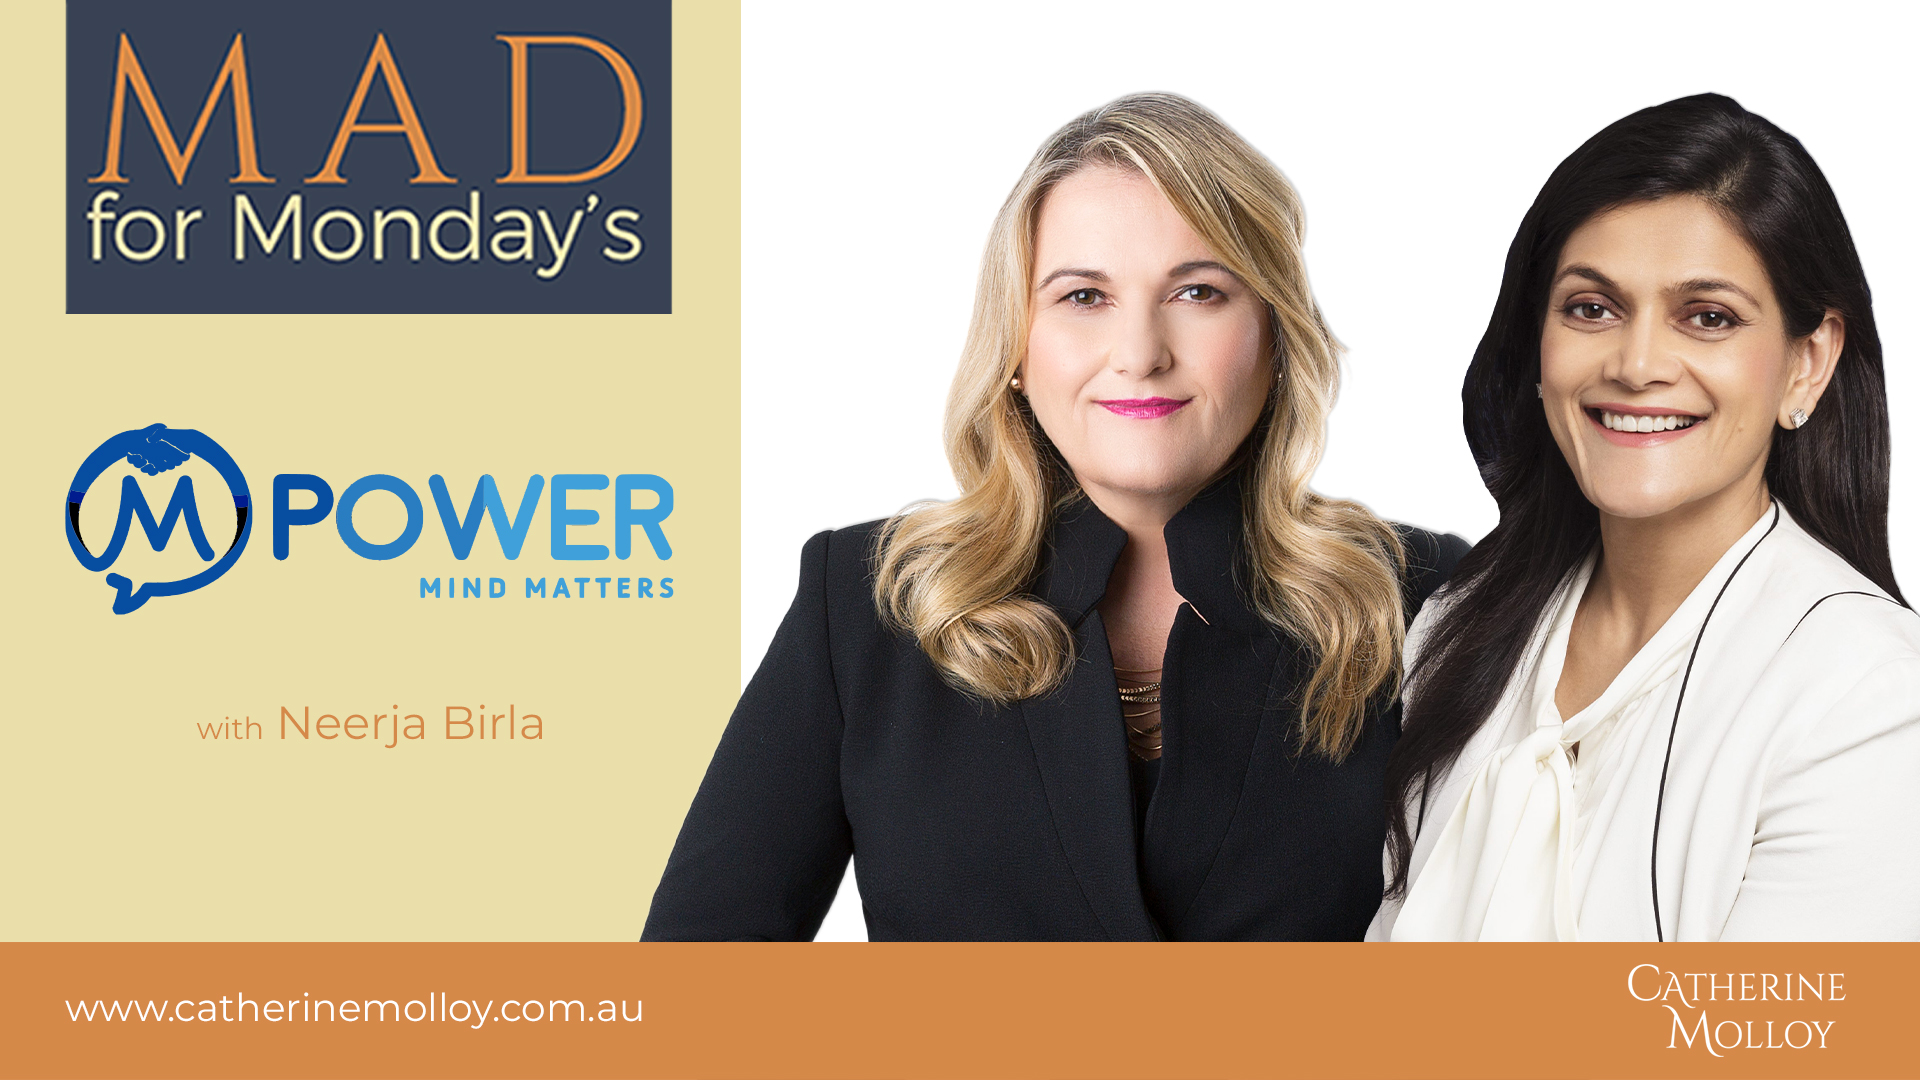 MAD for Monday’s – Mpower Mind Matters